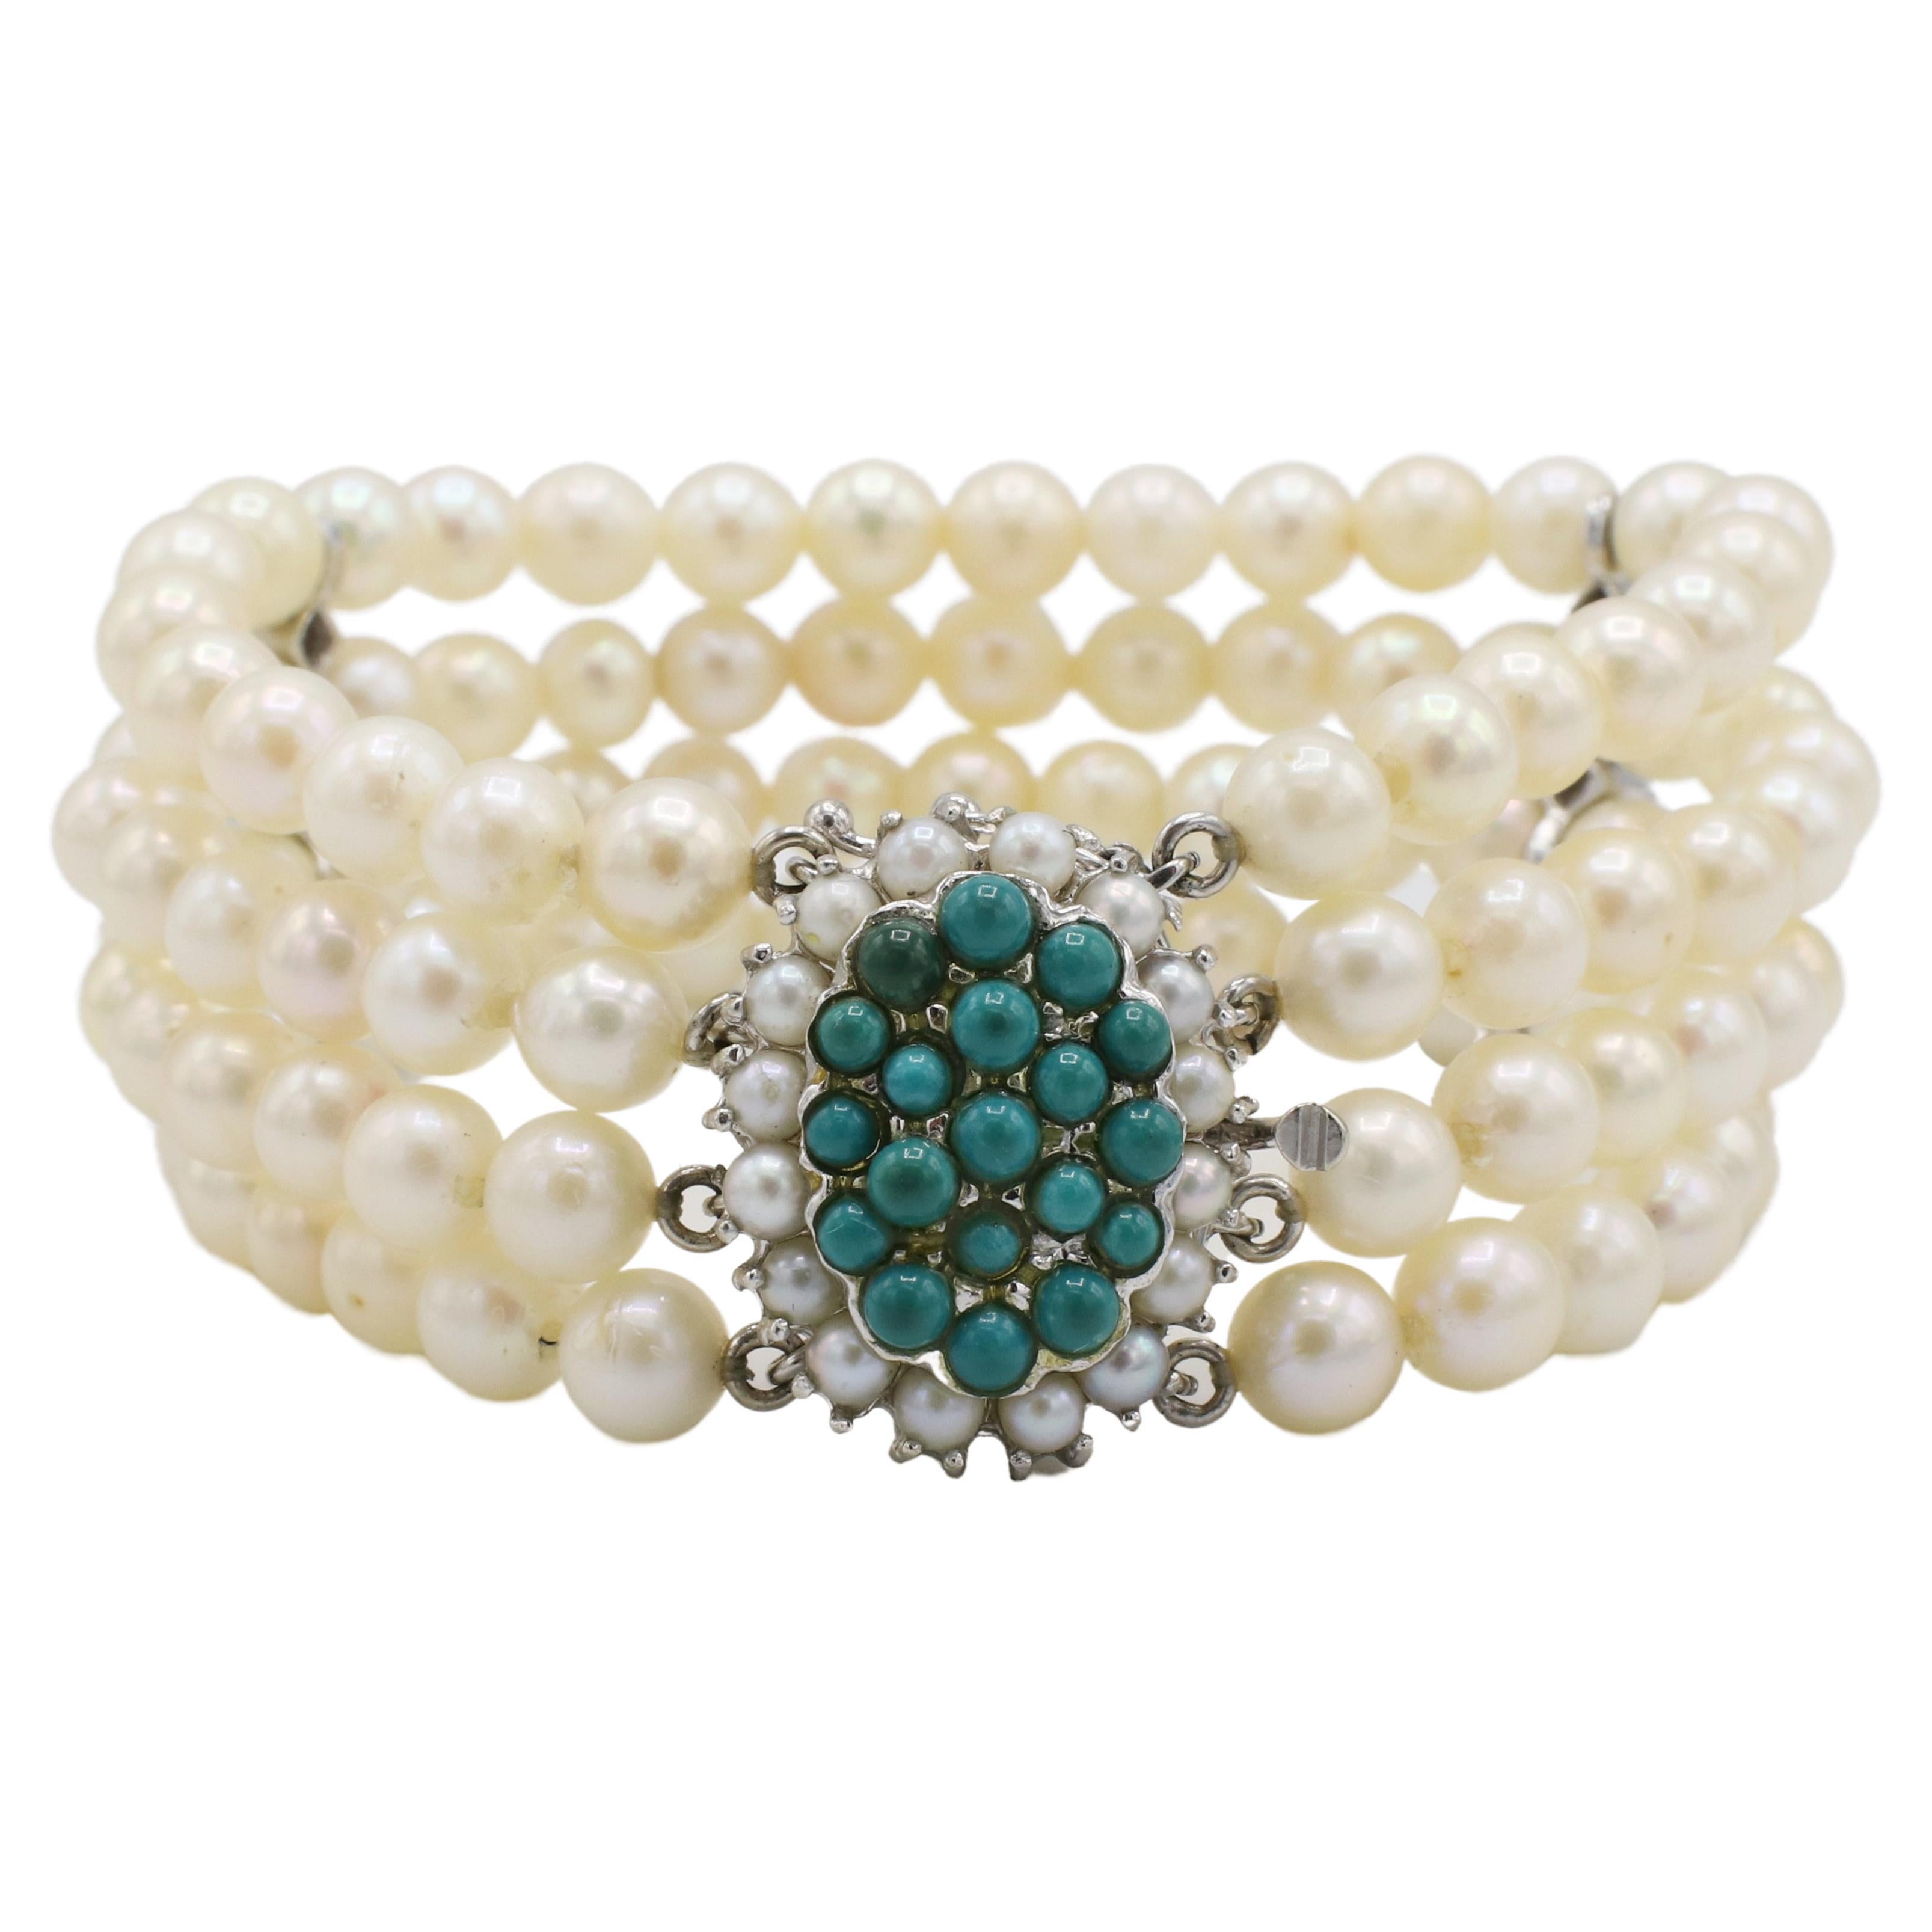 14 Karat White Gold 4-Row Pearl Bracelet With Turquoise Stations & Clasp